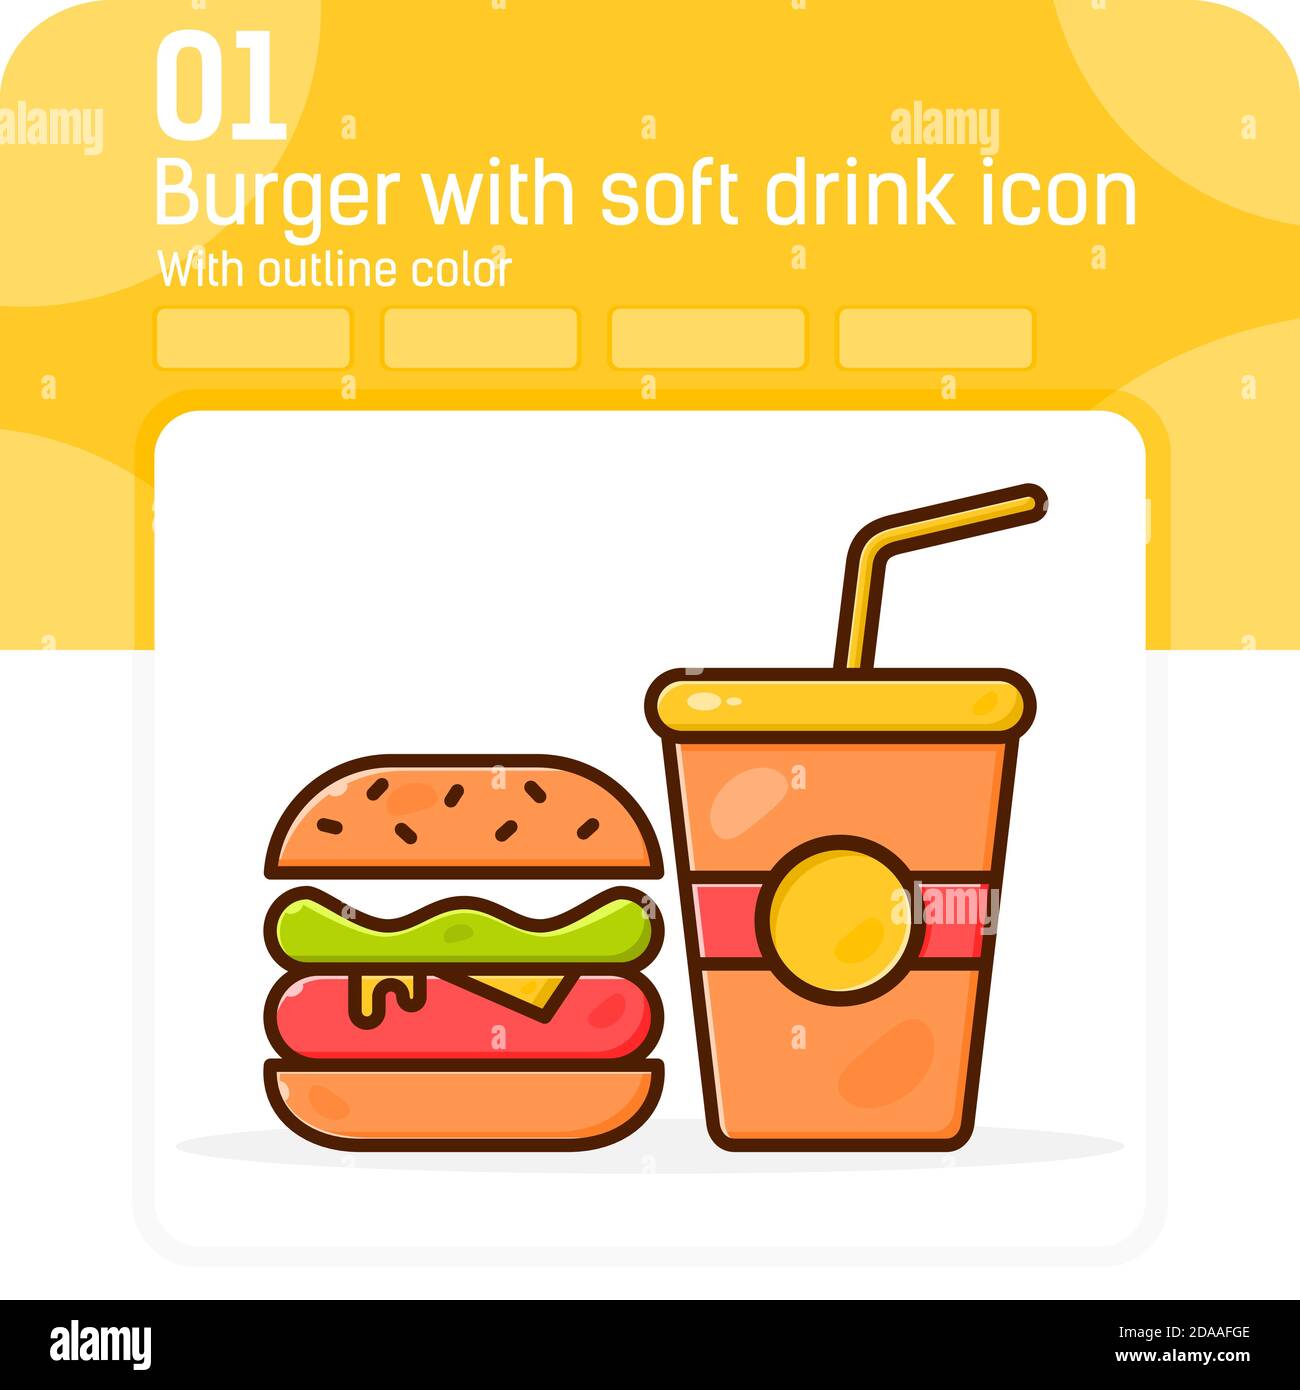 Burger with soft drink premium icon with outline color style isolated on white background. Vector illustration sign symbol pixel aligned icon concept Stock Vector